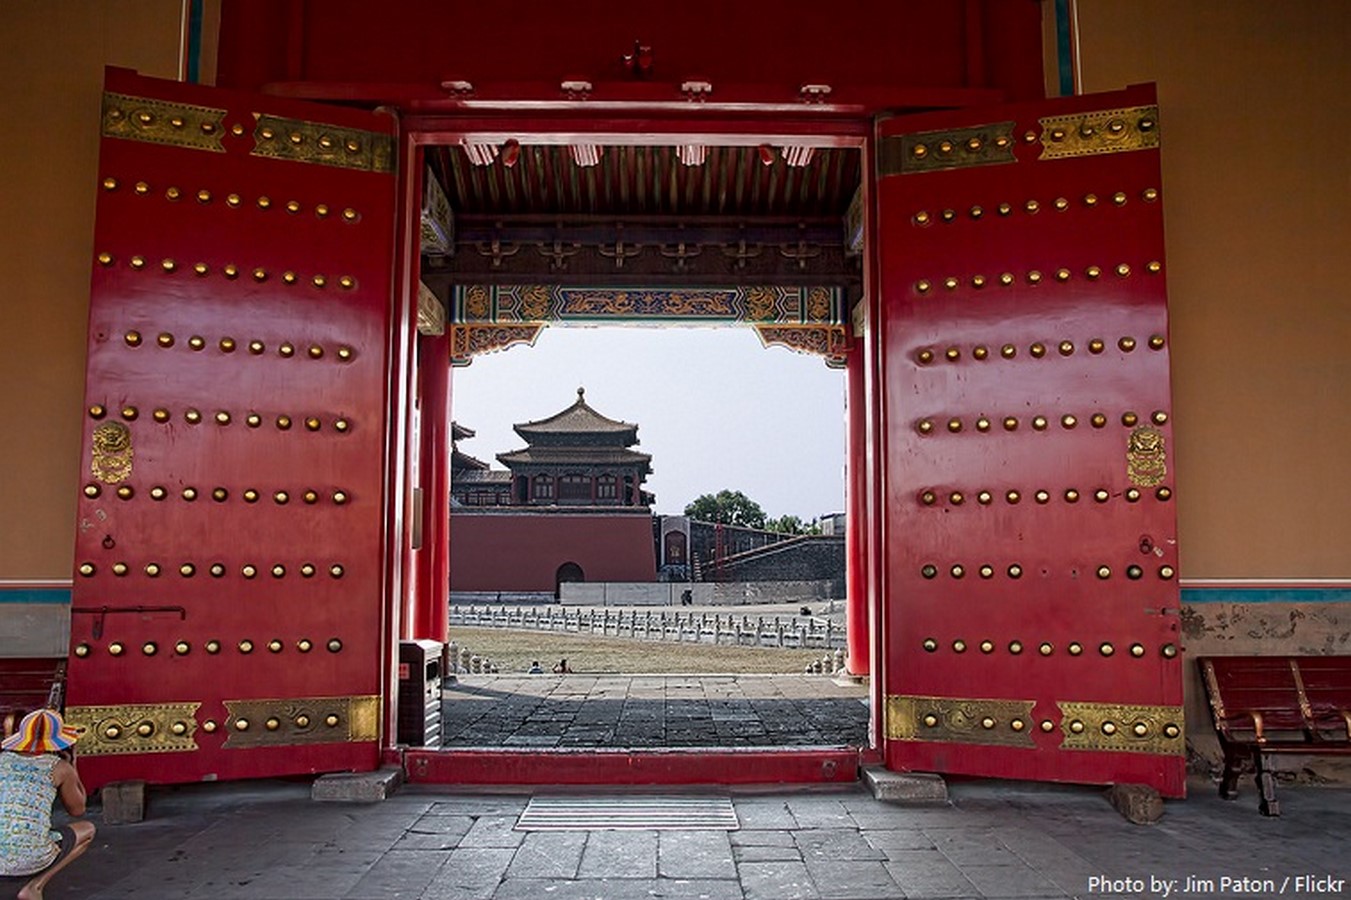 China's Forbidden City: 10 Things You Need to Know